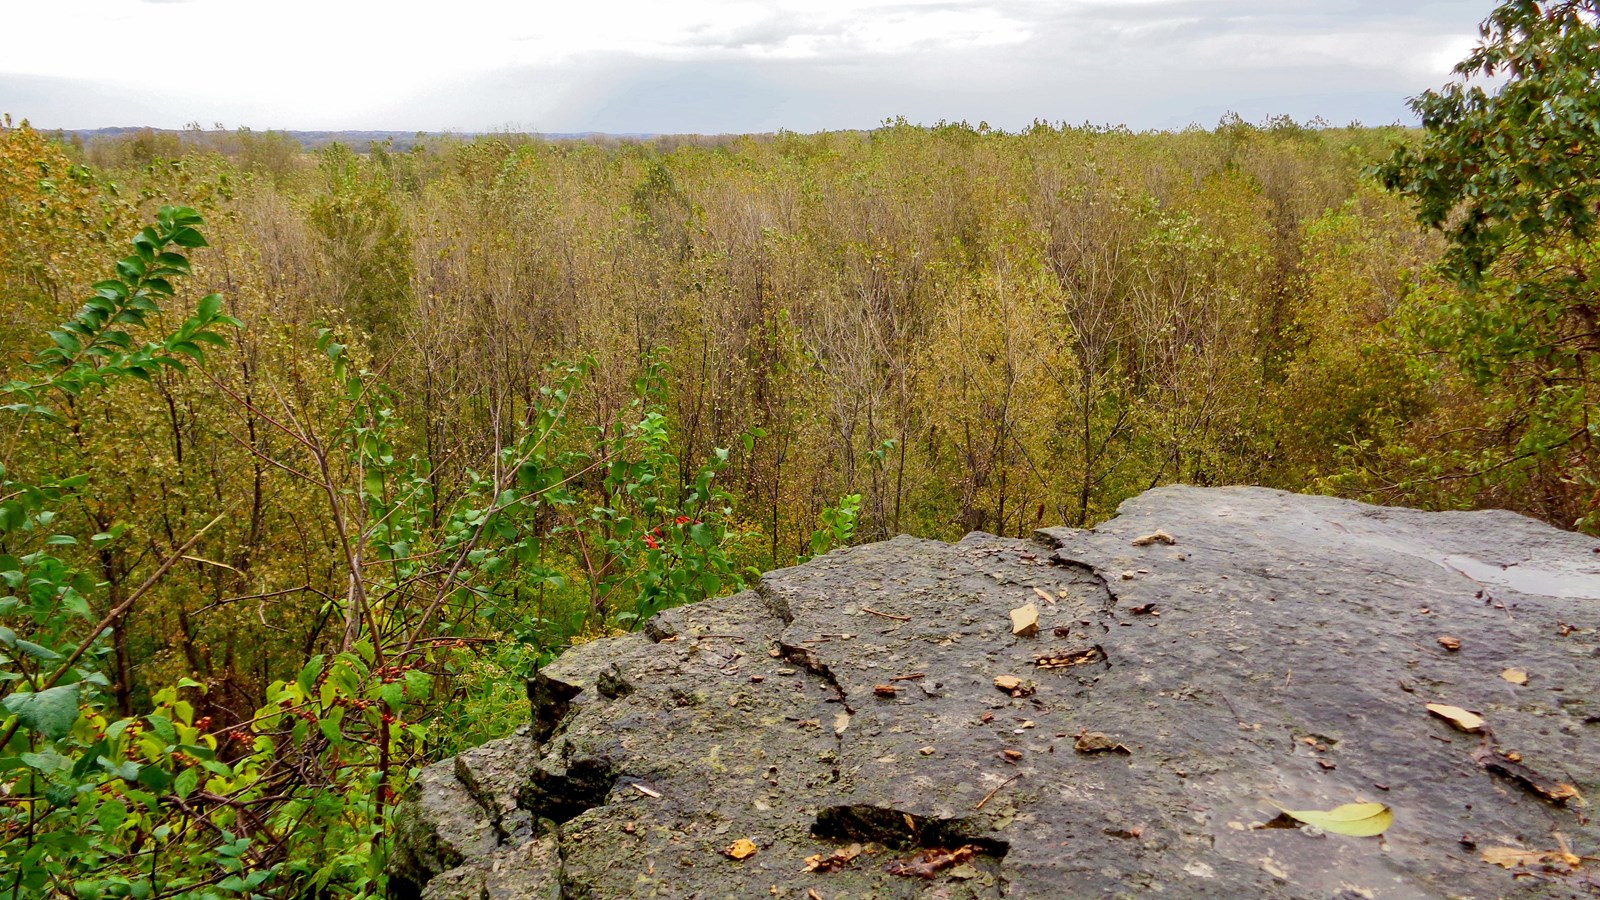  Rocky plateau overlooking tree filled bottomlands